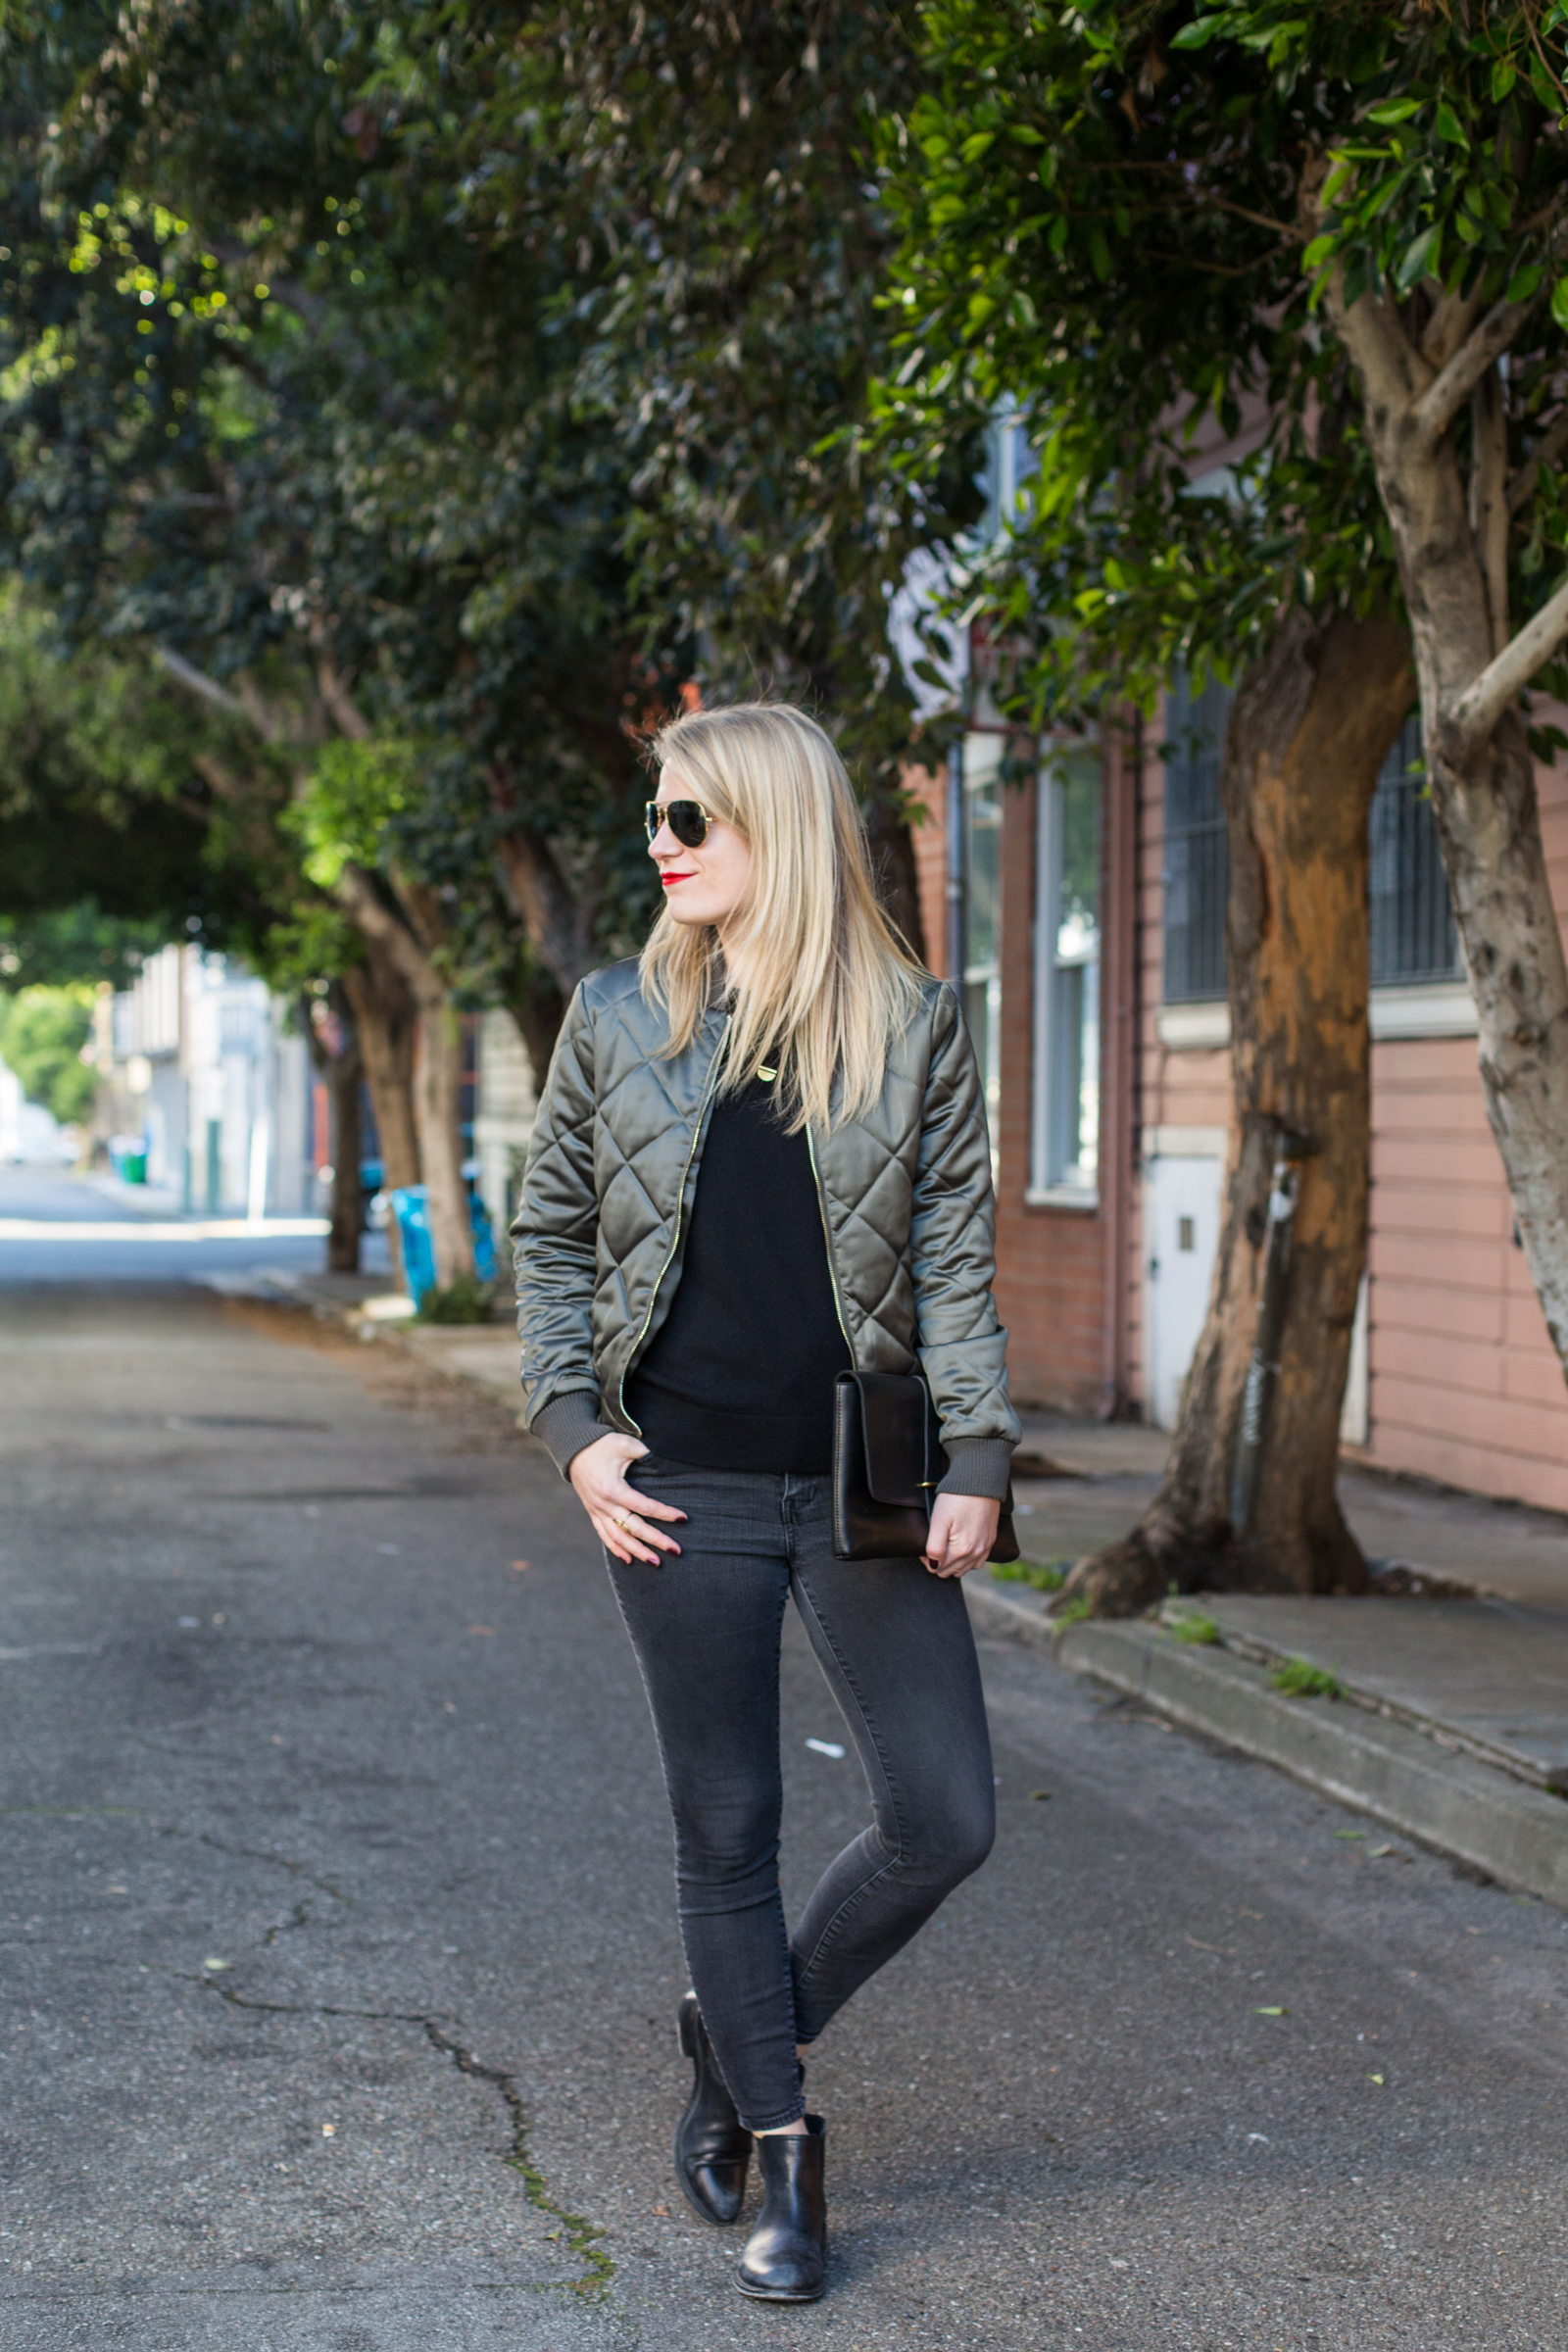 All Black Everything with Black Everlane Sweater, Madewell Jeans and Johnston & Murphy Chelsea Boots.